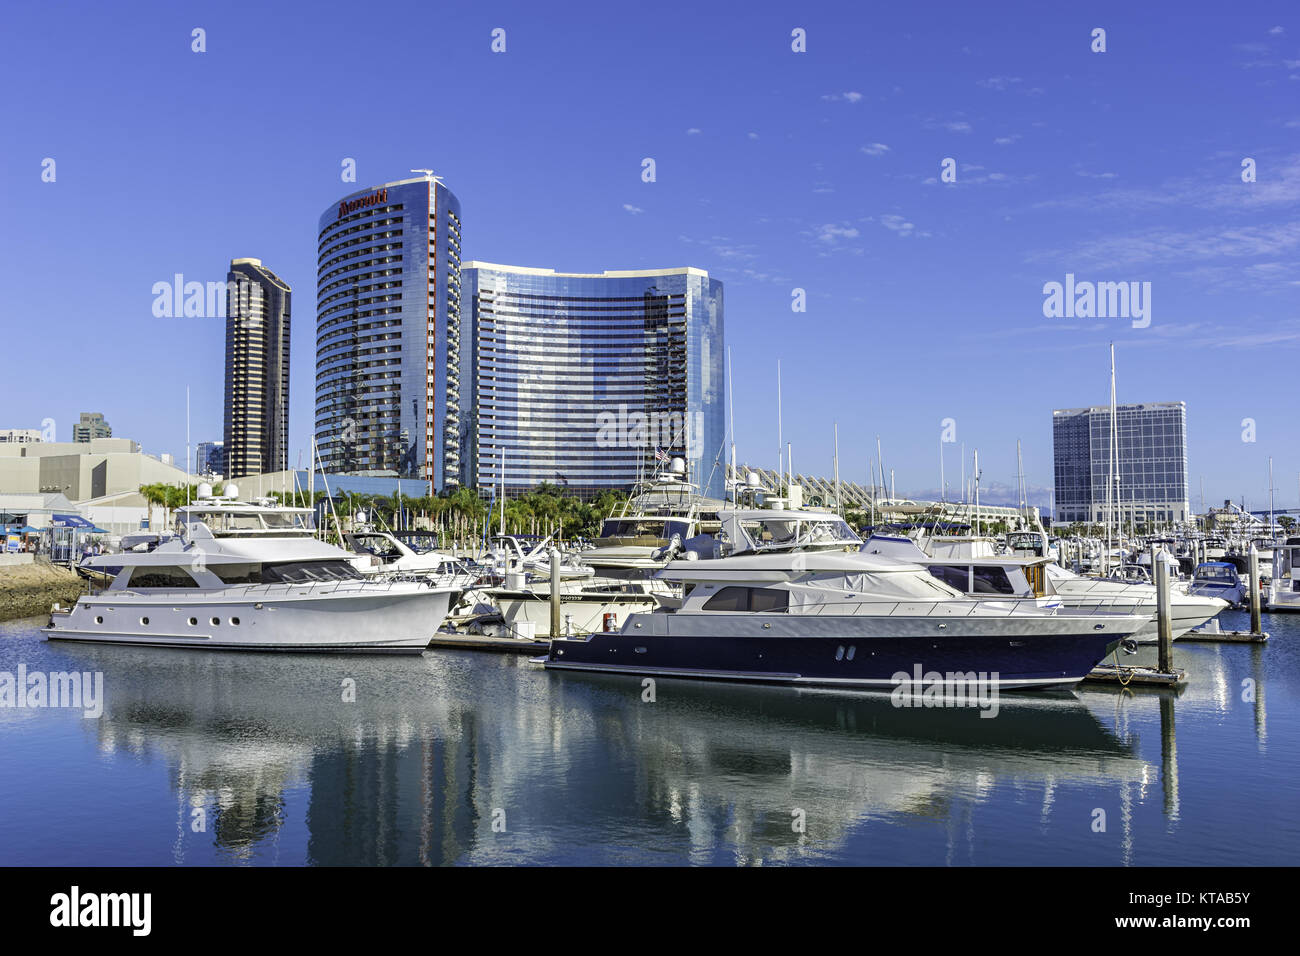 SAN DIEGO, CLAIFORNIA USA - NOVEMBER 5, 2017: Luxury yachts in Embarcadero Marina near Seaport Village in San Diego Bay with the San Diego skyline and Stock Photo